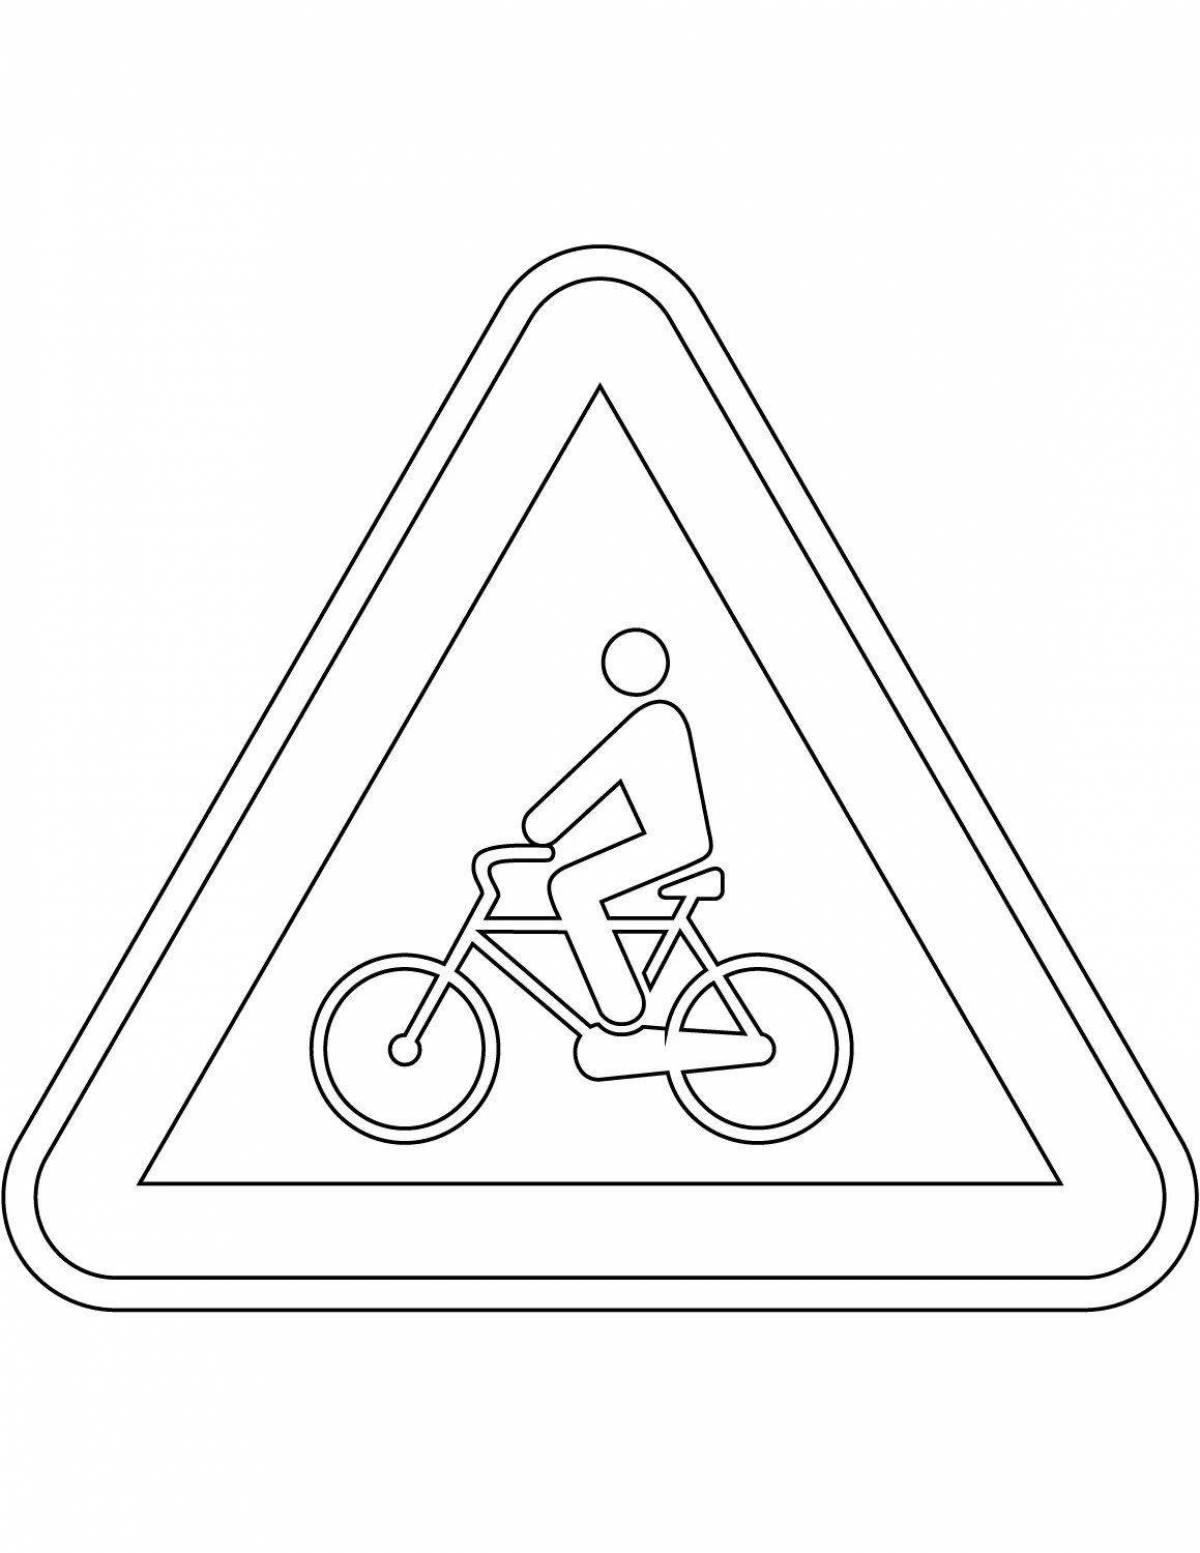 Coloring page lively bans cycling